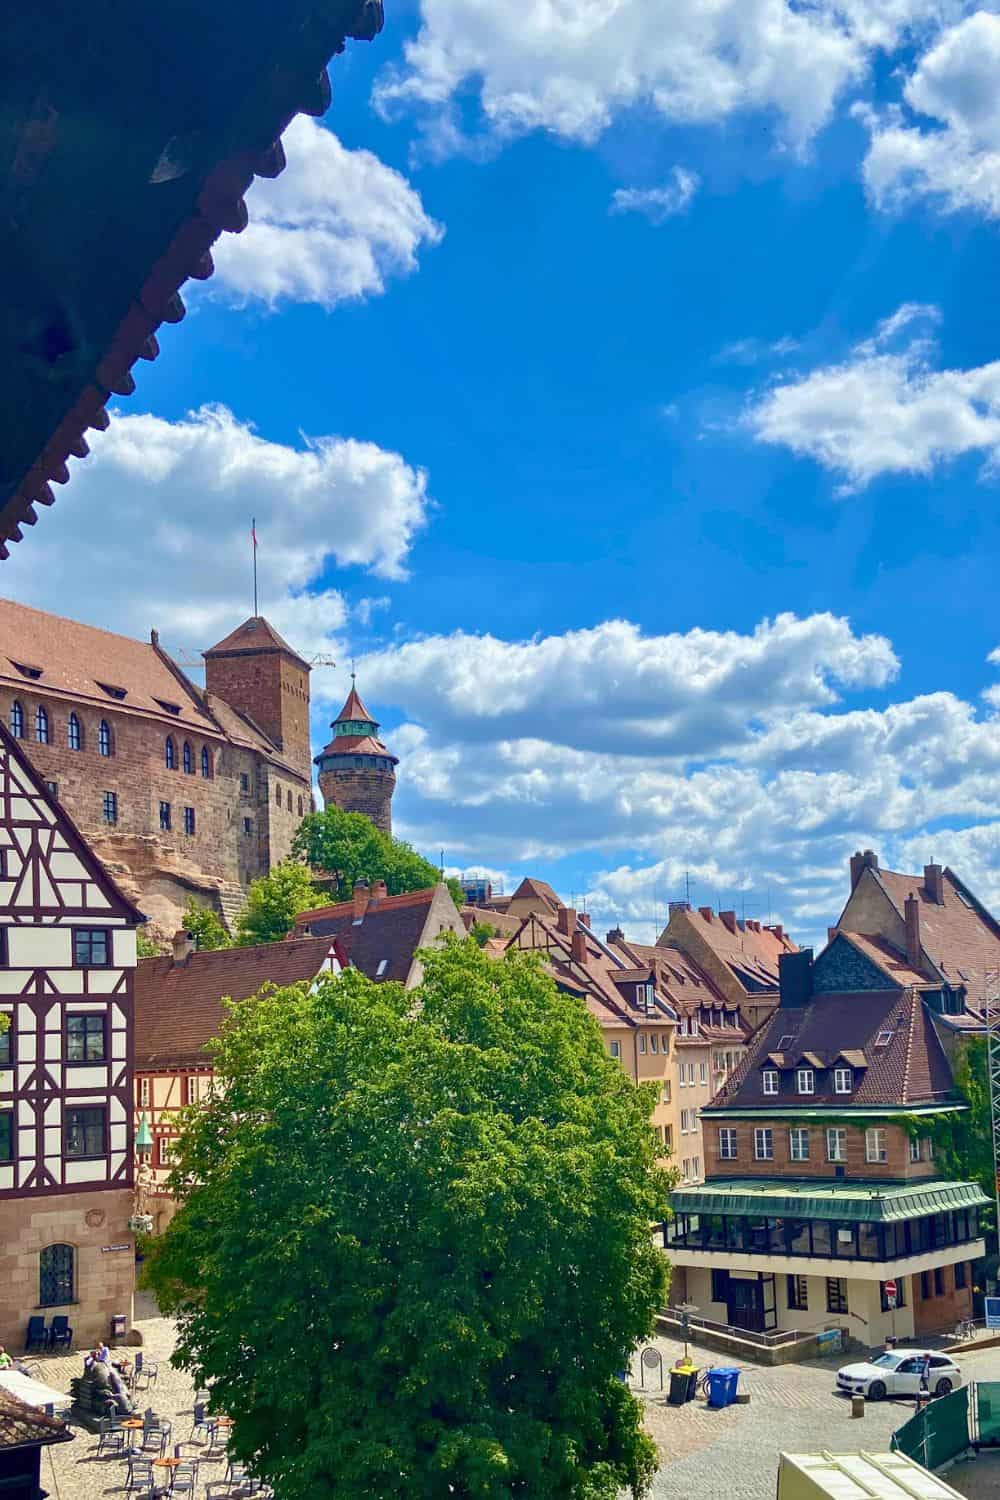 A captivating view of Nuremberg, Germany, on a sunny day, showcasing the city's iconic medieval architecture. The image features half-timbered buildings and a sturdy stone castle towering over the old town. The vibrant greenery of trees contrasts with the quaint, cobblestone streets and the clear blue sky punctuated by fluffy white clouds, inviting exploration and discovery in this historic city.